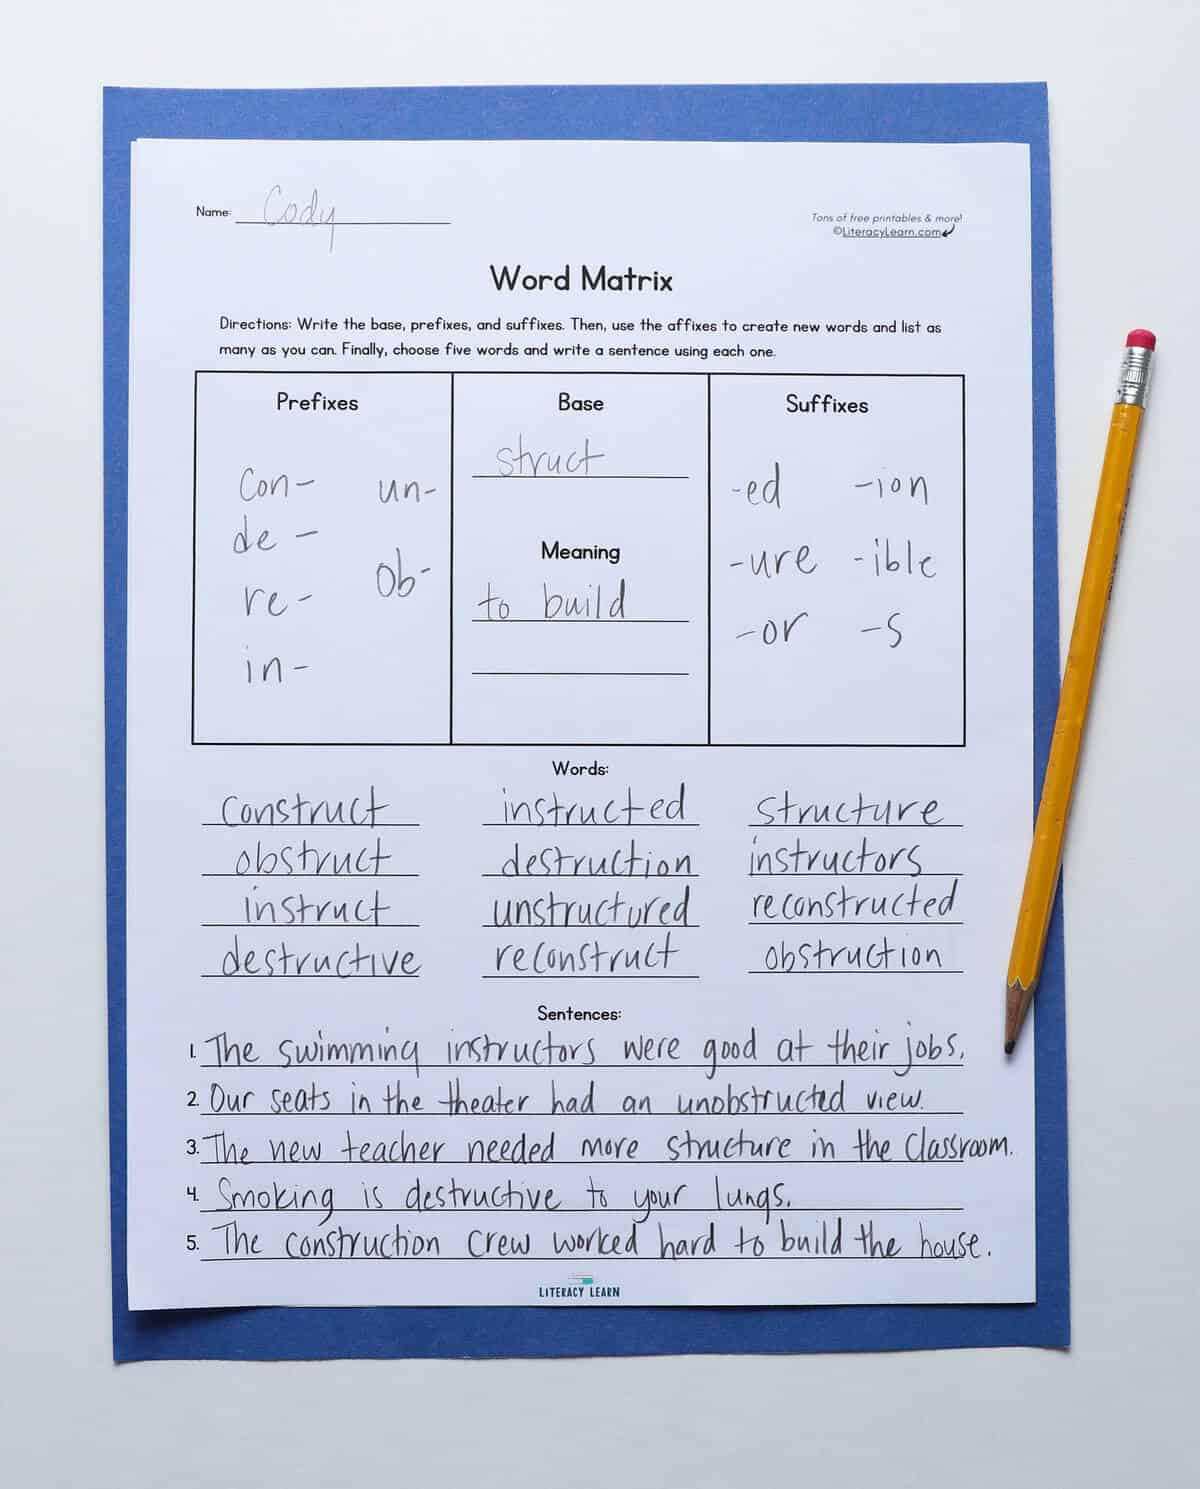 Photograph of a student's completed word matrix and a pencil.